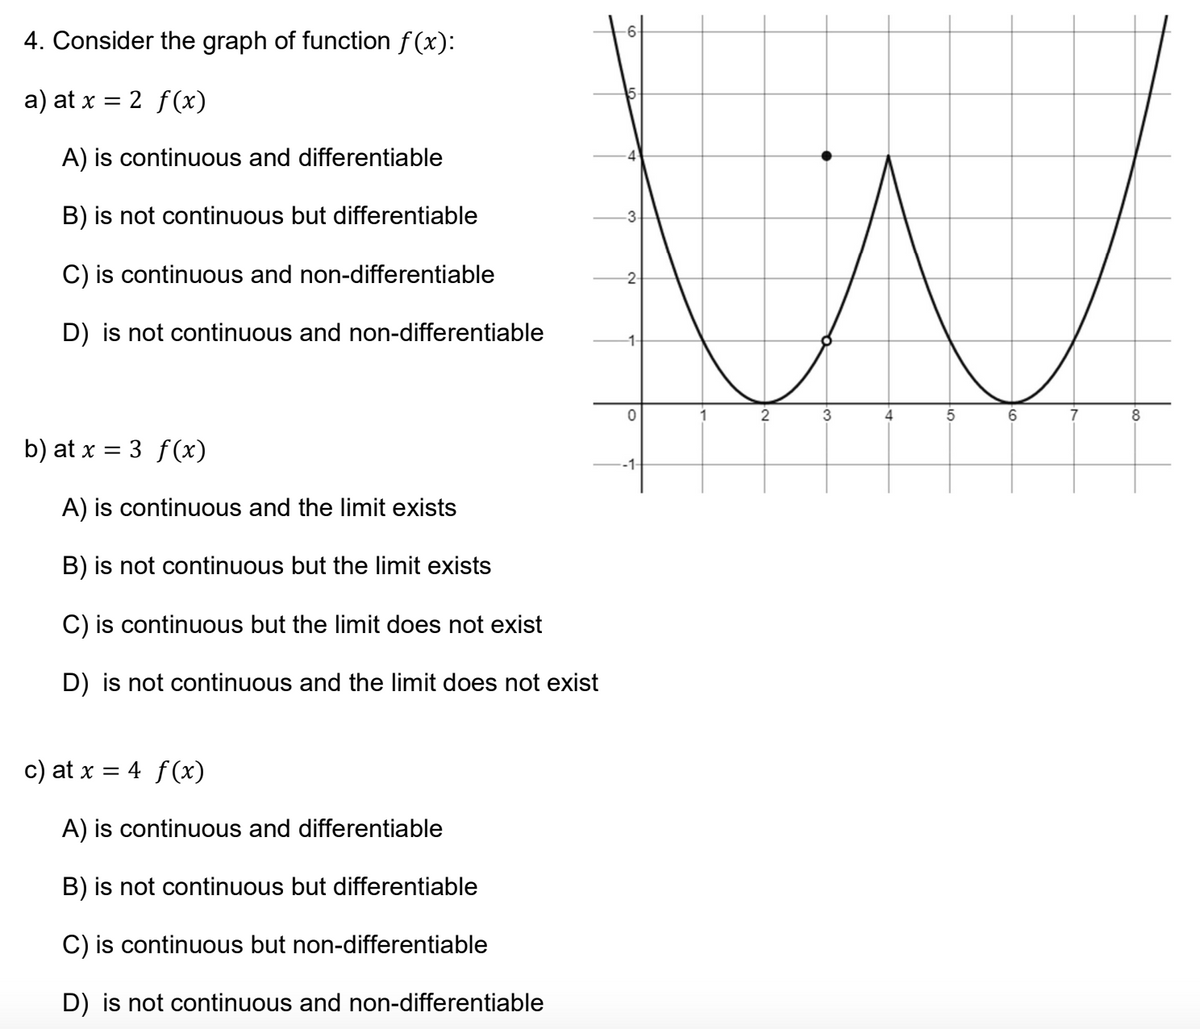 4. Consider the graph of function f (x):
a) at x = 2 f(x)
A) is continuous and differentiable
B) is not continuous but differentiable
-3.
C) is continuous and non-differentiable
-2-
D) is not continuous and non-differentiable
1-
3
4
8
b) at x = 3 f(x)
-1-
A) is continuous and the limit exists
B) is not continuous but the limit exists
C) is continuous but the limit does not exist
D) is not continuous and the limit does not exist
c) at x = 4 f(x)
A) is continuous and differentiable
B) is not continuous but differentiable
C) is continuous but non-differentiable
D) is not continuous and non-differentiable
